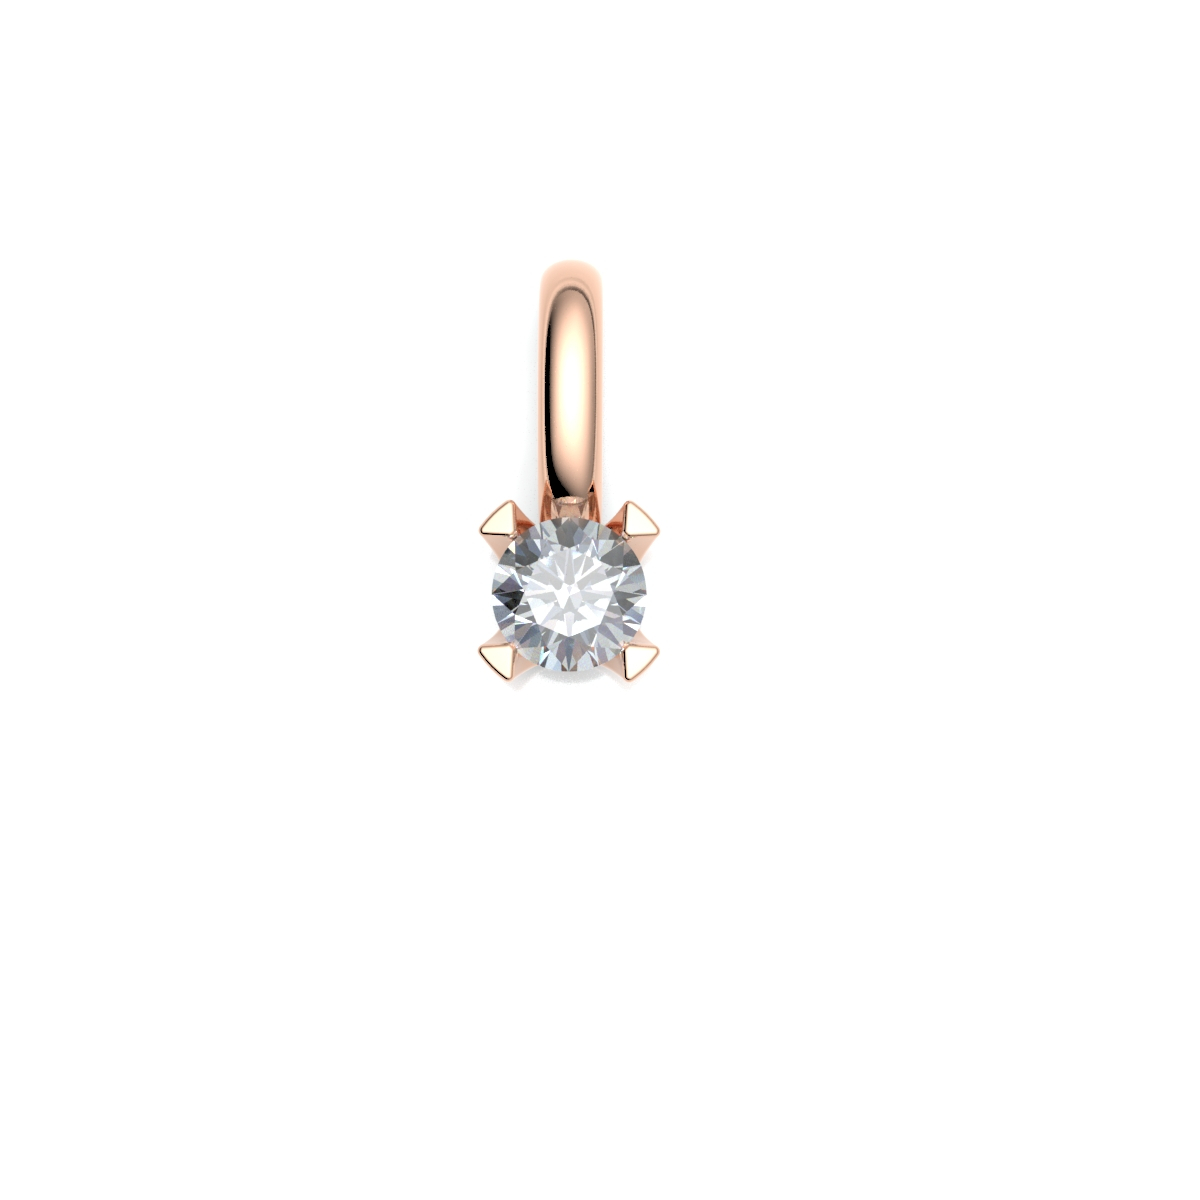 212798-4034-001 | Anhänger Hameln 212798 375 Rotgold<br> Brillant 0,150 ct H-SI ∅ 3.4mm<br>100% Made in Germany  